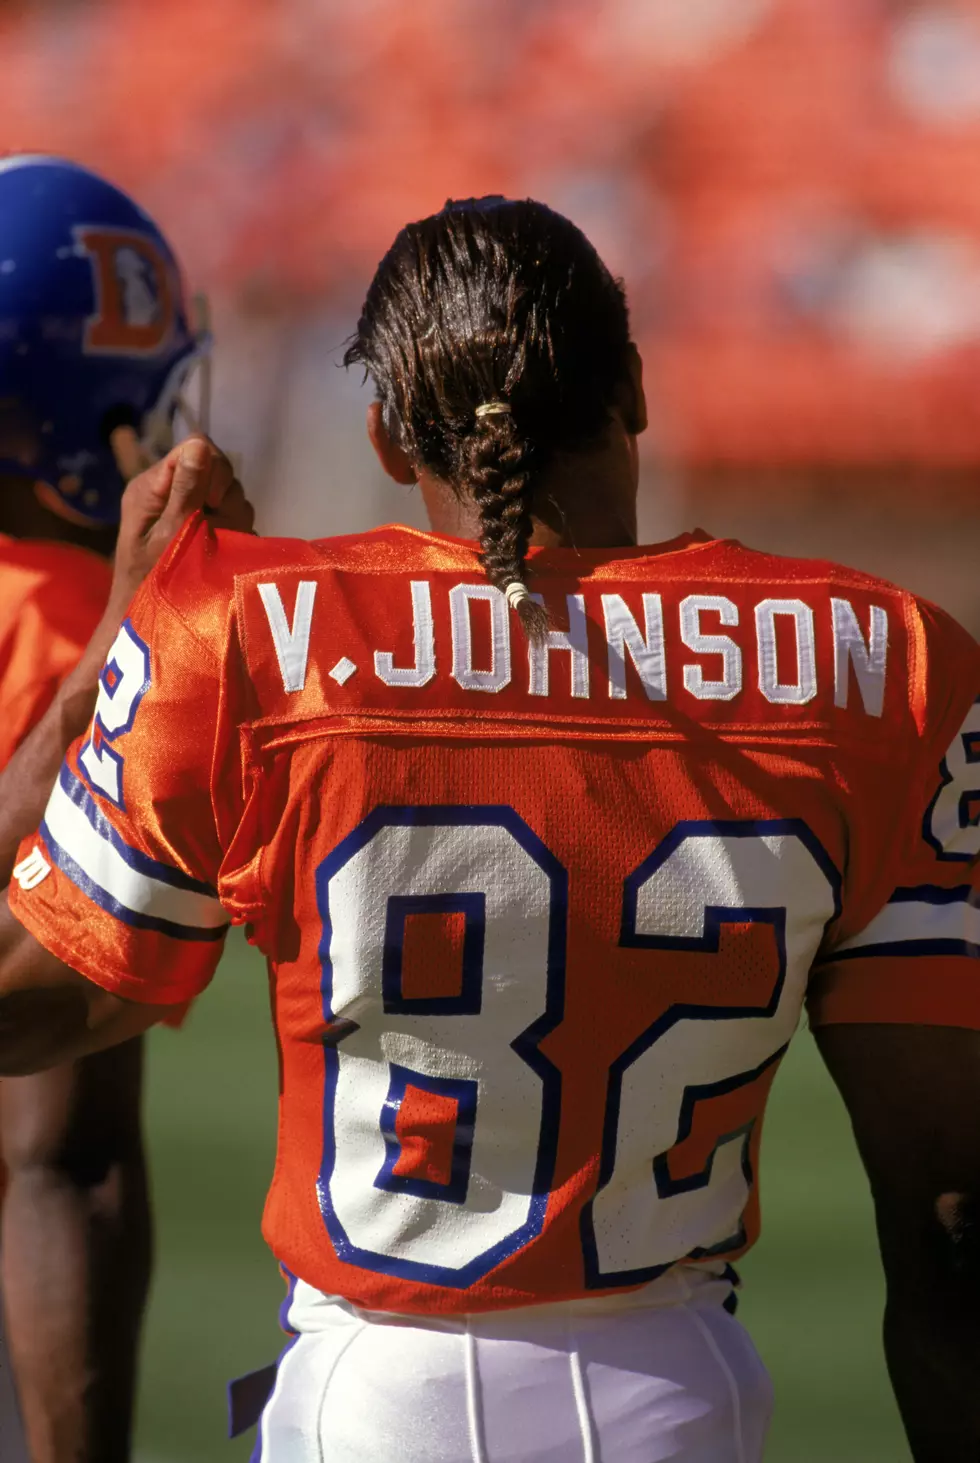 Former Broncos receiver Vance Johnson Discusses His Story after Football